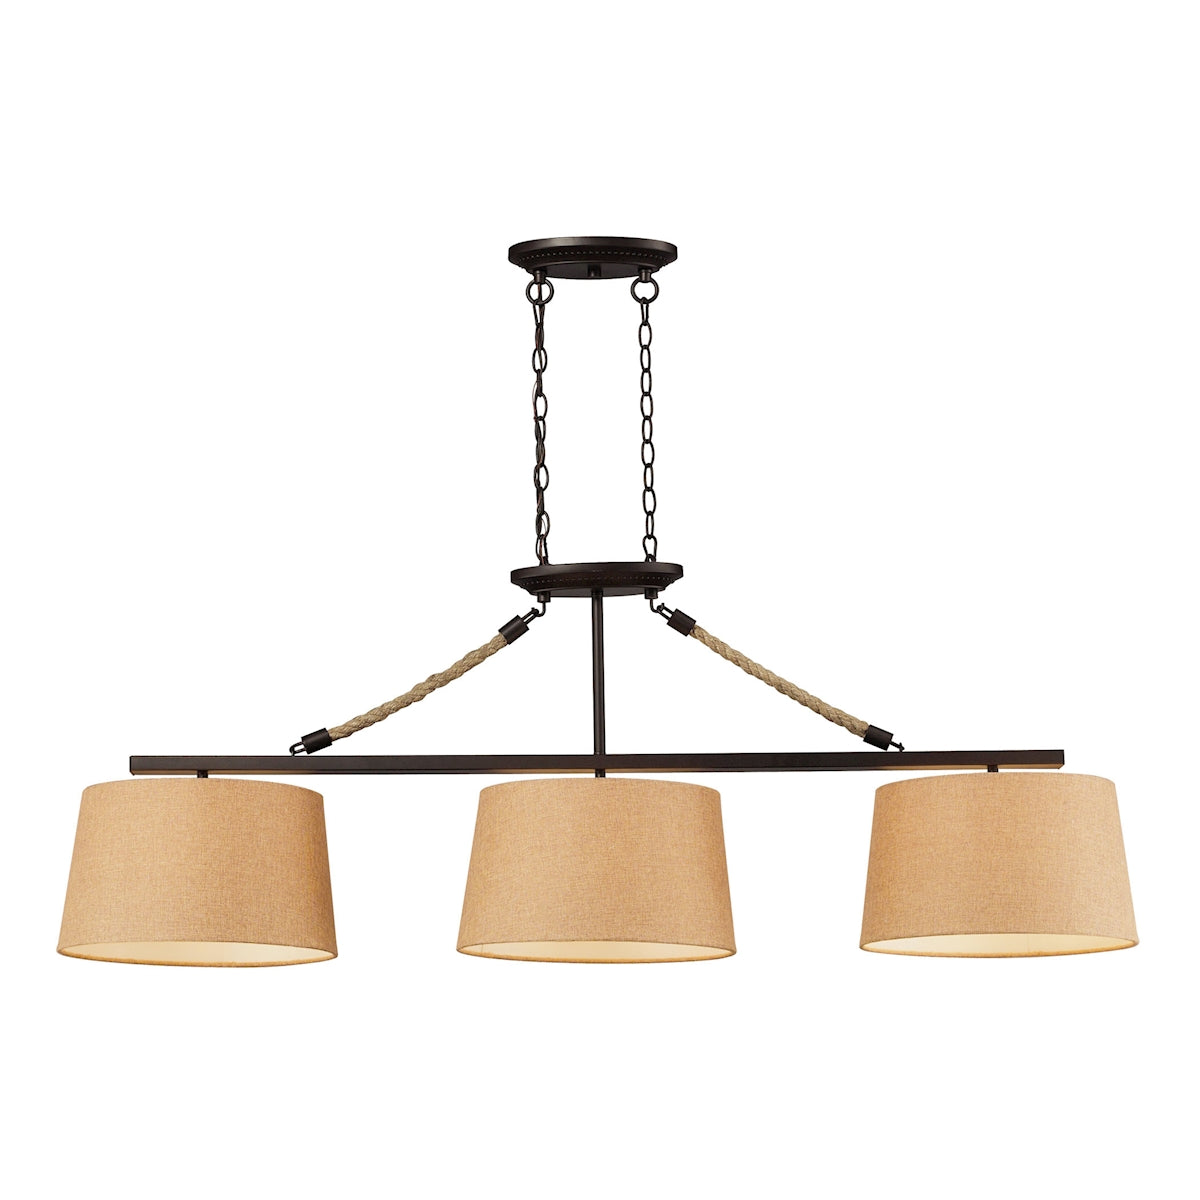 ELK Lighting 73046-3 Natural Rope 3-Light Island Light in Aged Bronze with Tan Linen Shades